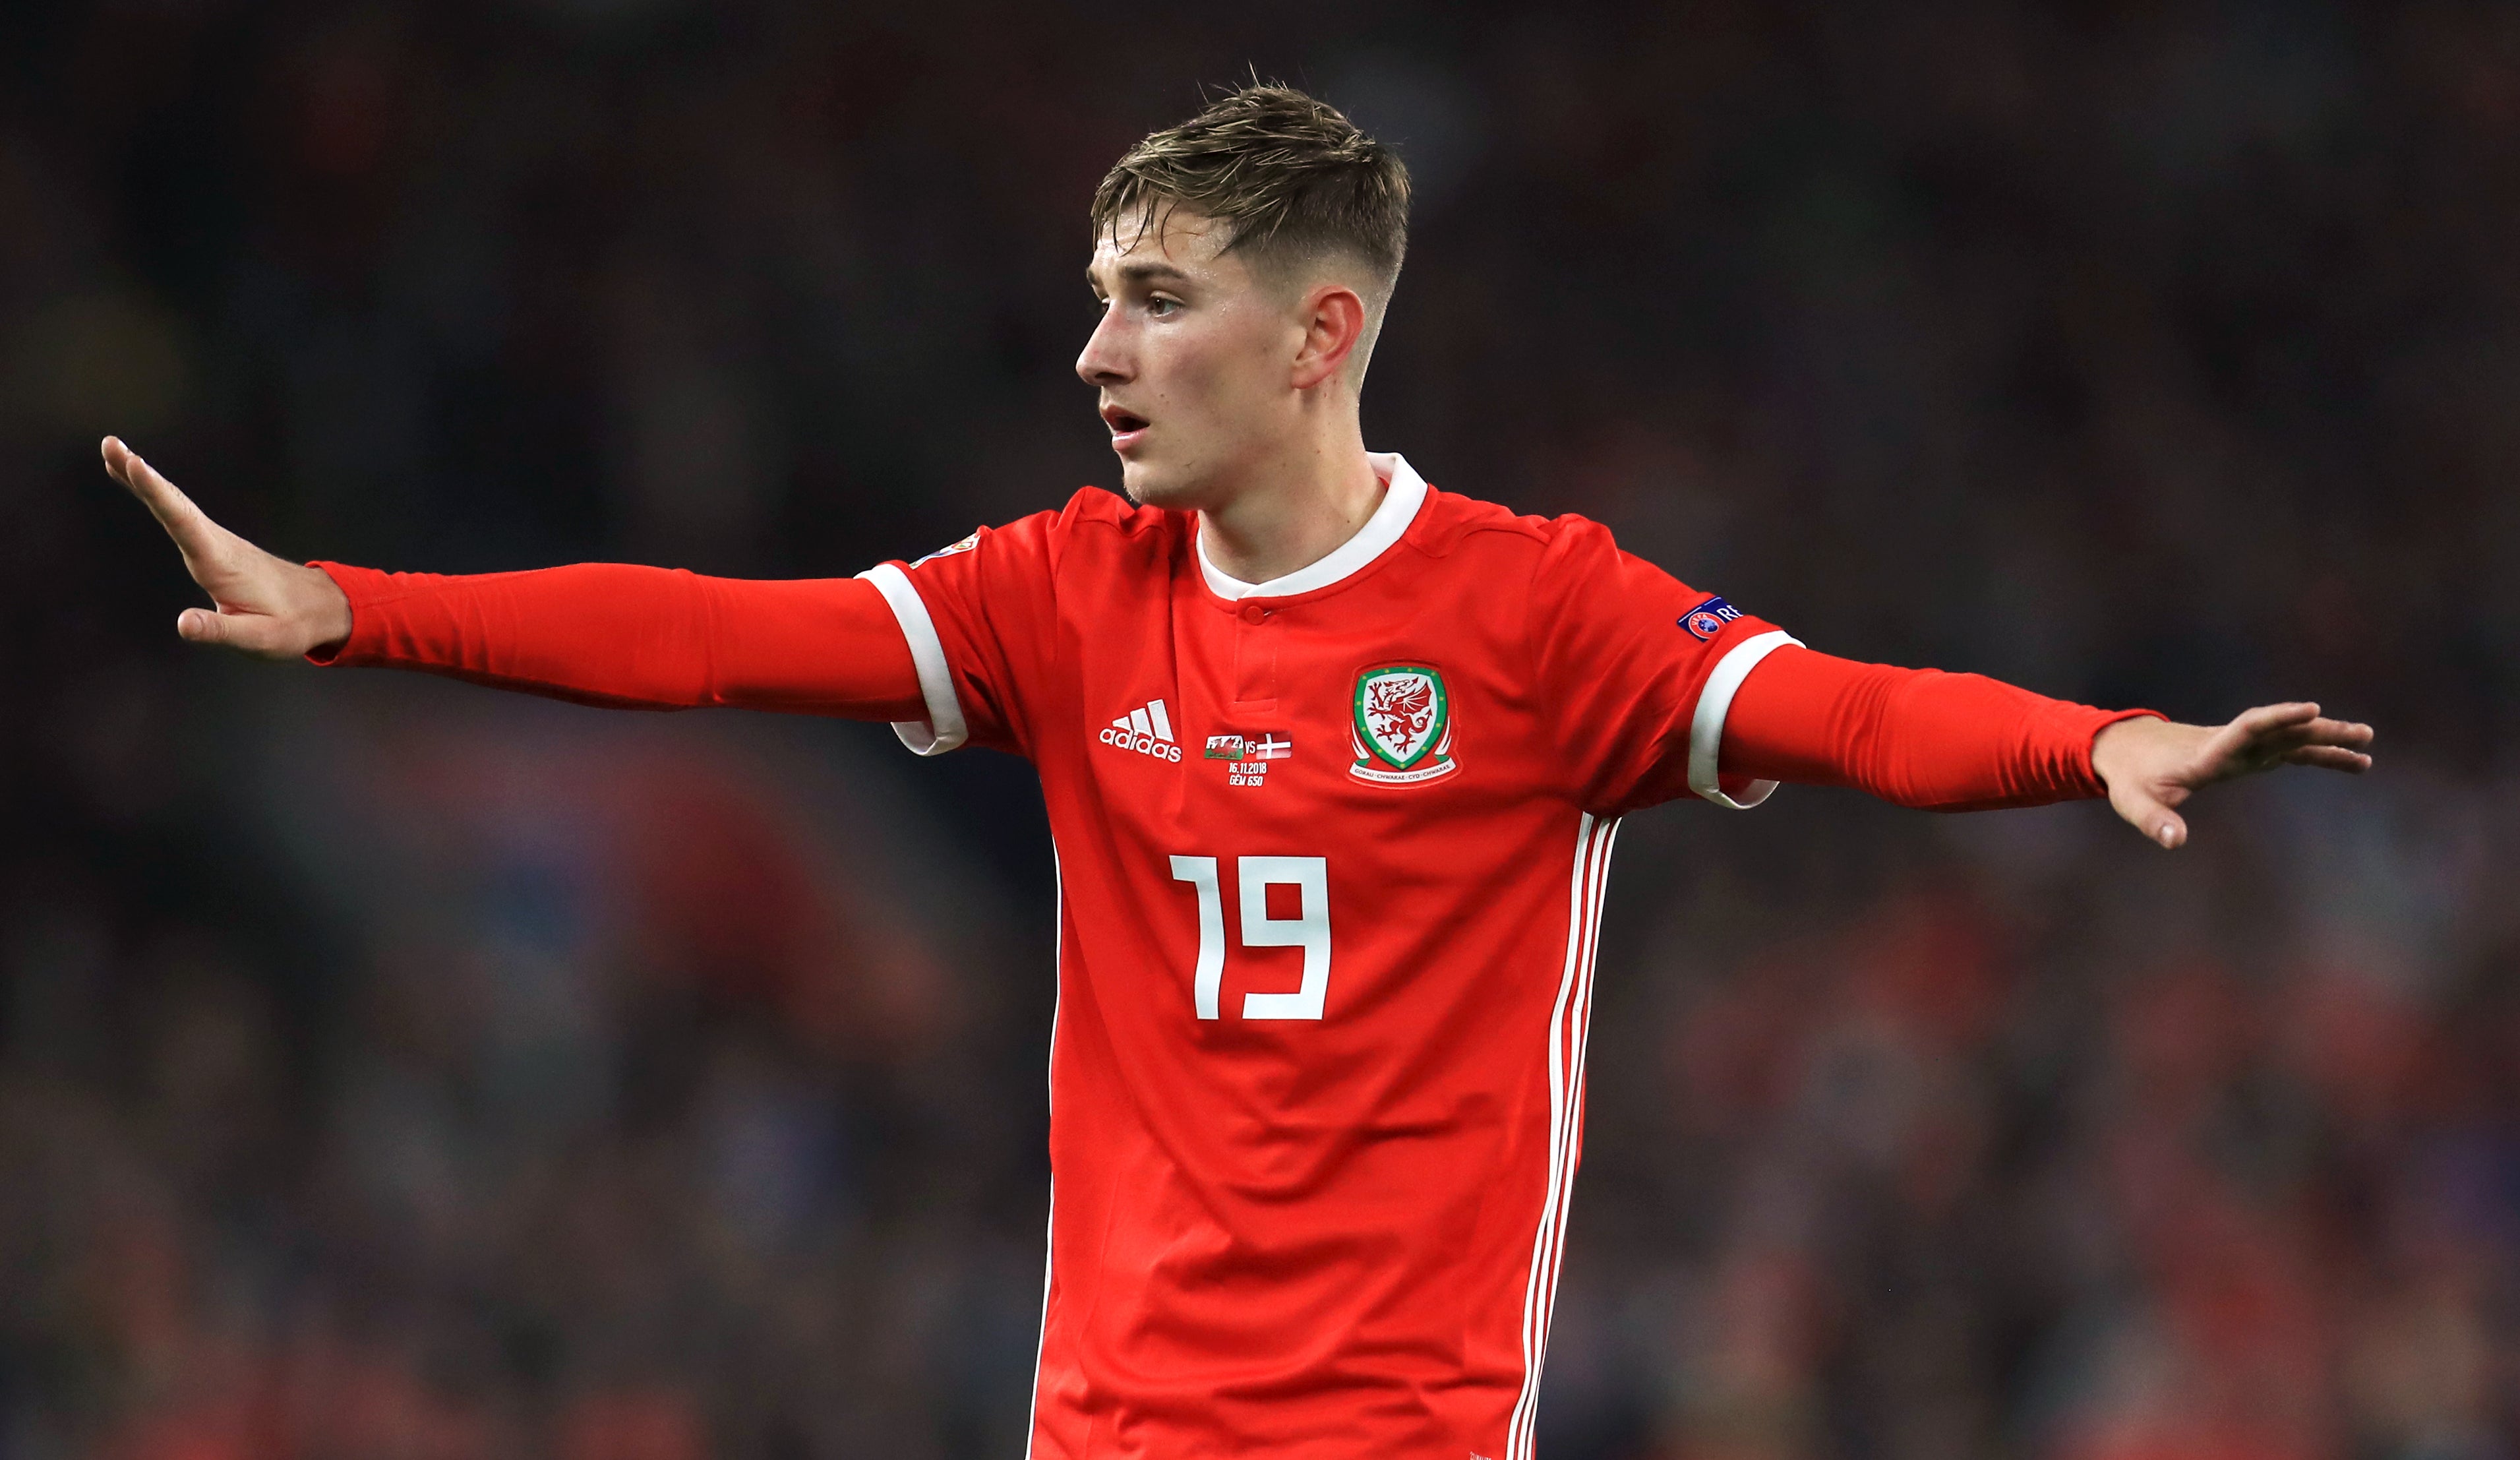 Wales forward David Brooks hopes to complete his cancer recovery with a place at the World Cup in November (Mike Egerton/PA)